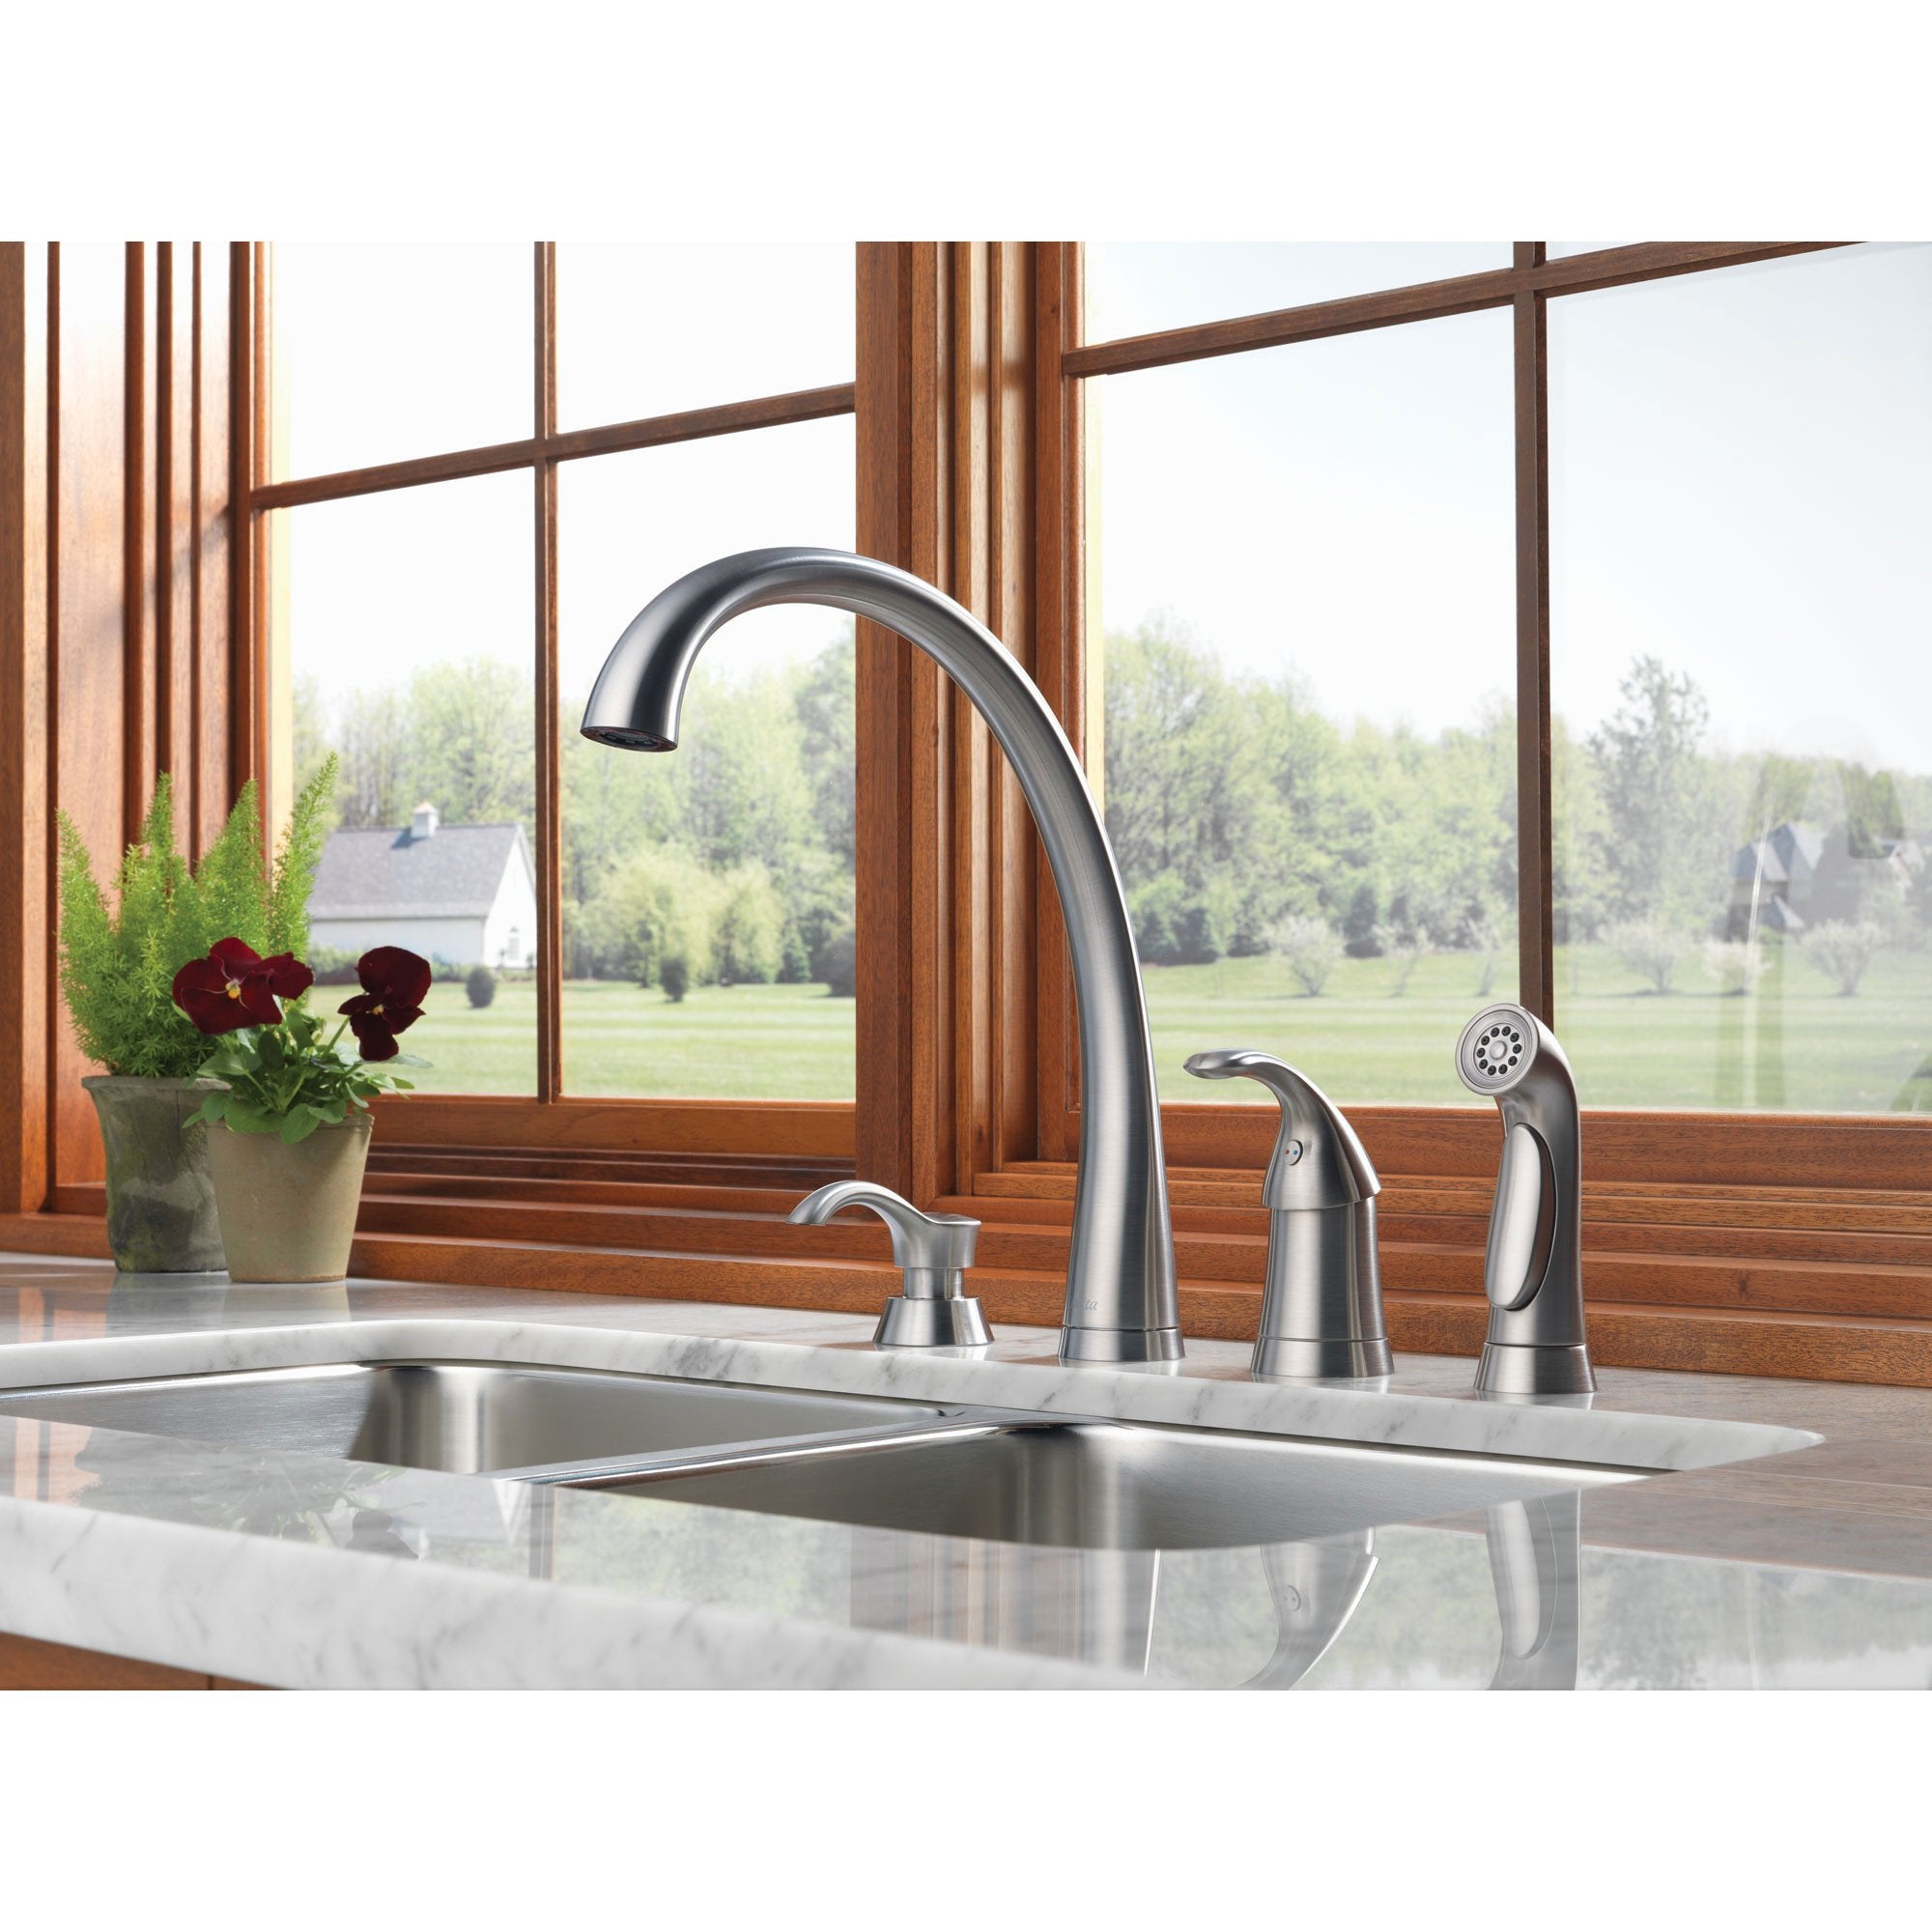 Delta Arctic Stainless Finish Modern Pilar Single Handle Kitchen Sink Faucet with Side Spray and Deck Mount Soap Dispenser Package D066CR